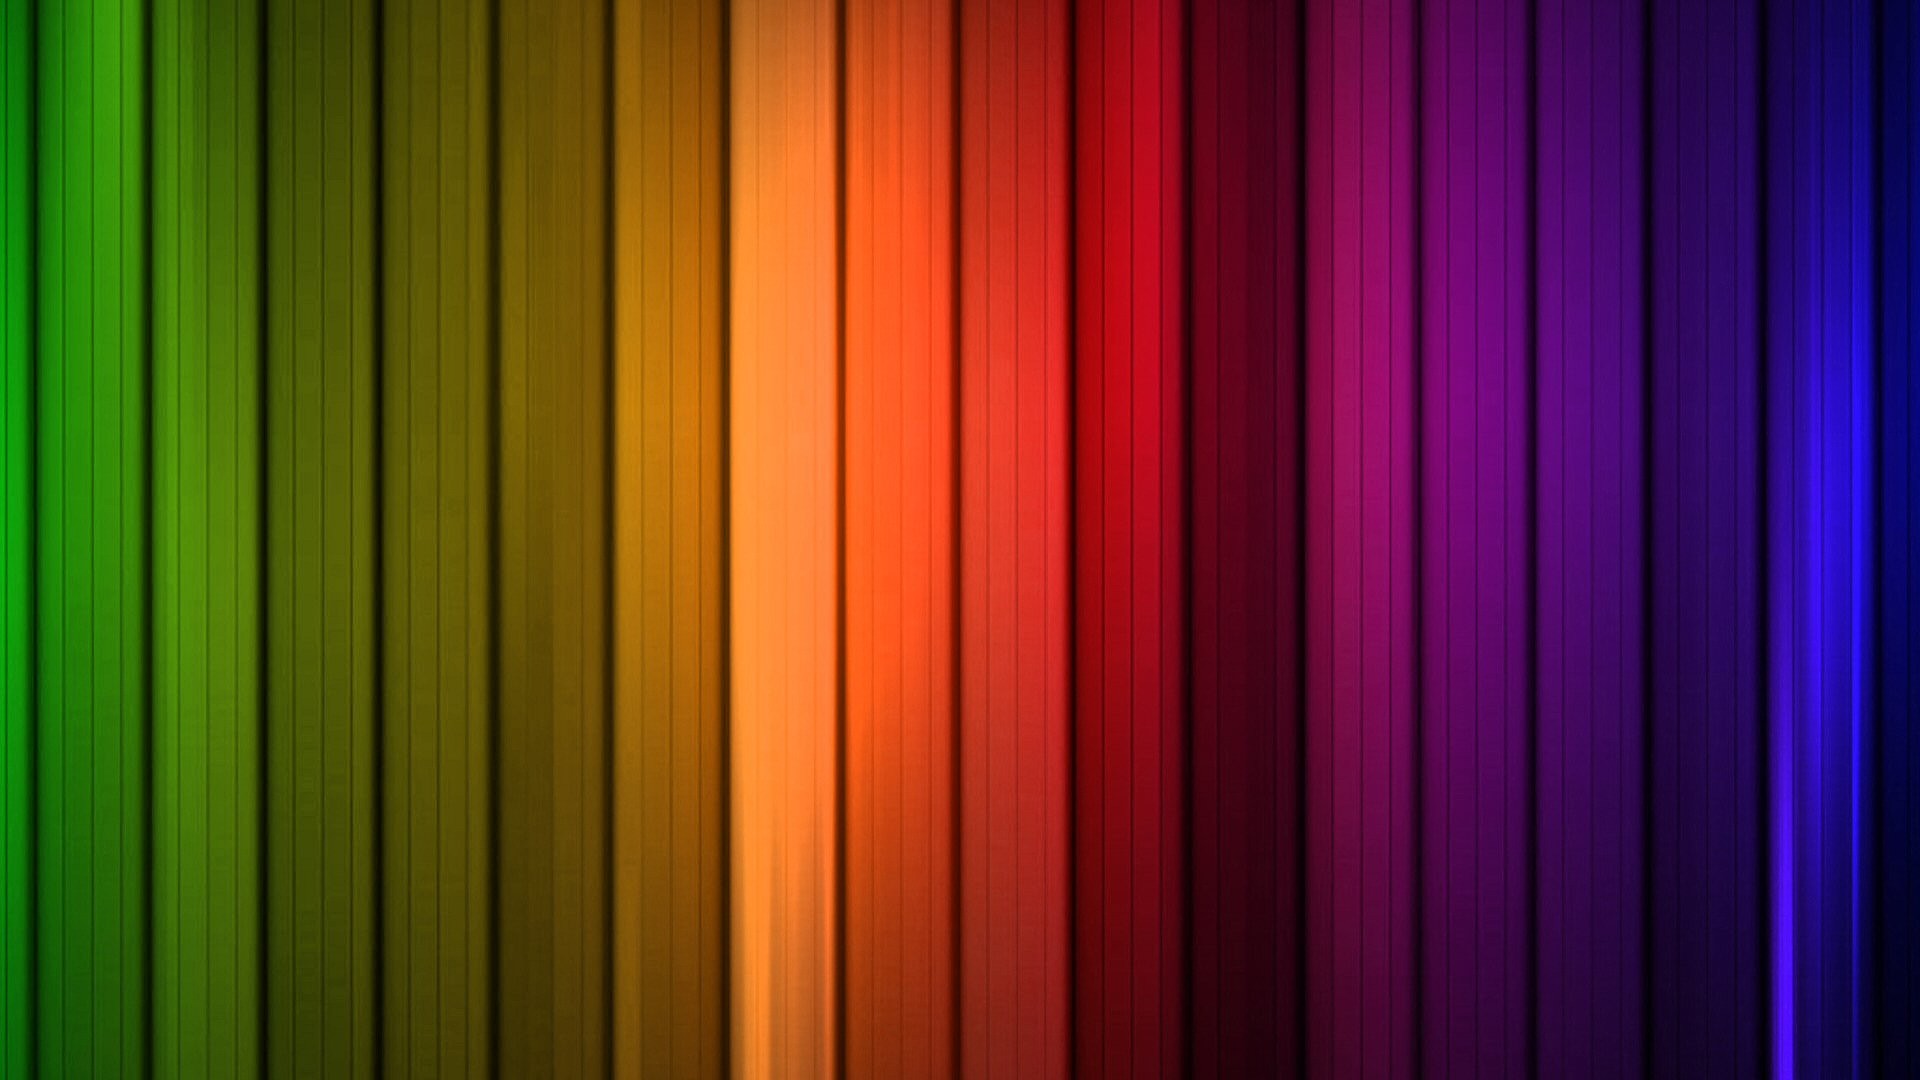 Wallpaper Rainbow HD with image resolution 1920x1080 pixel. You can make this wallpaper for your Desktop Computer Backgrounds, Mac Wallpapers, Android Lock screen or iPhone Screensavers